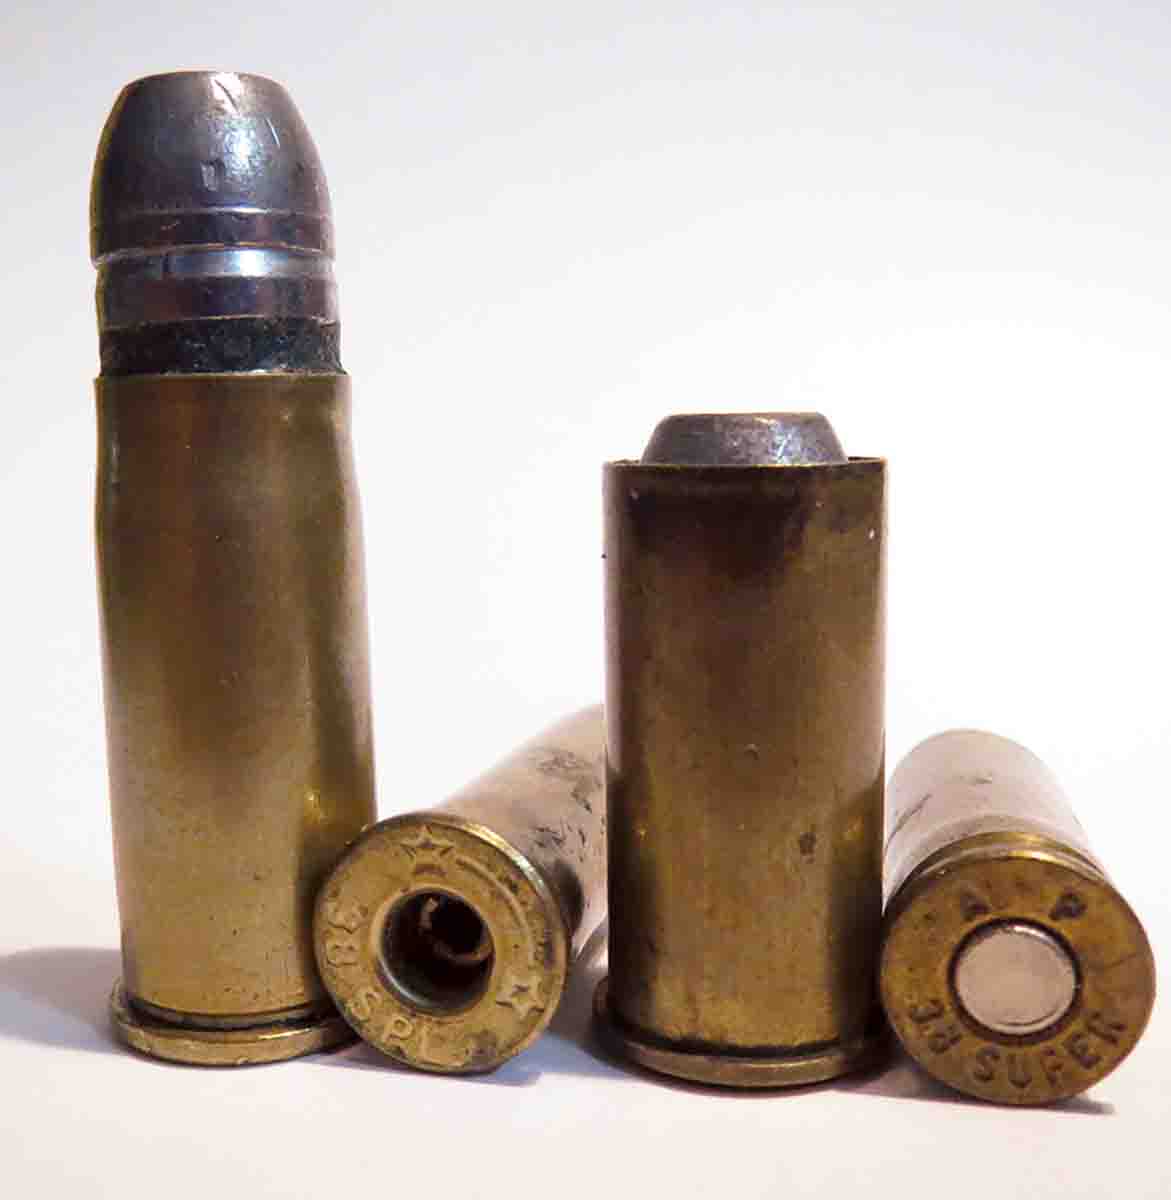 These cartridges illustrate mistakes made by handloaders not paying attention to detail. Included is a (left to right): .44 Special case run through .38-40 dies, a loaded round with primer omitted, a bullet that was not crimped and a primer seated with too much force; it may or may not ignite upon firing.